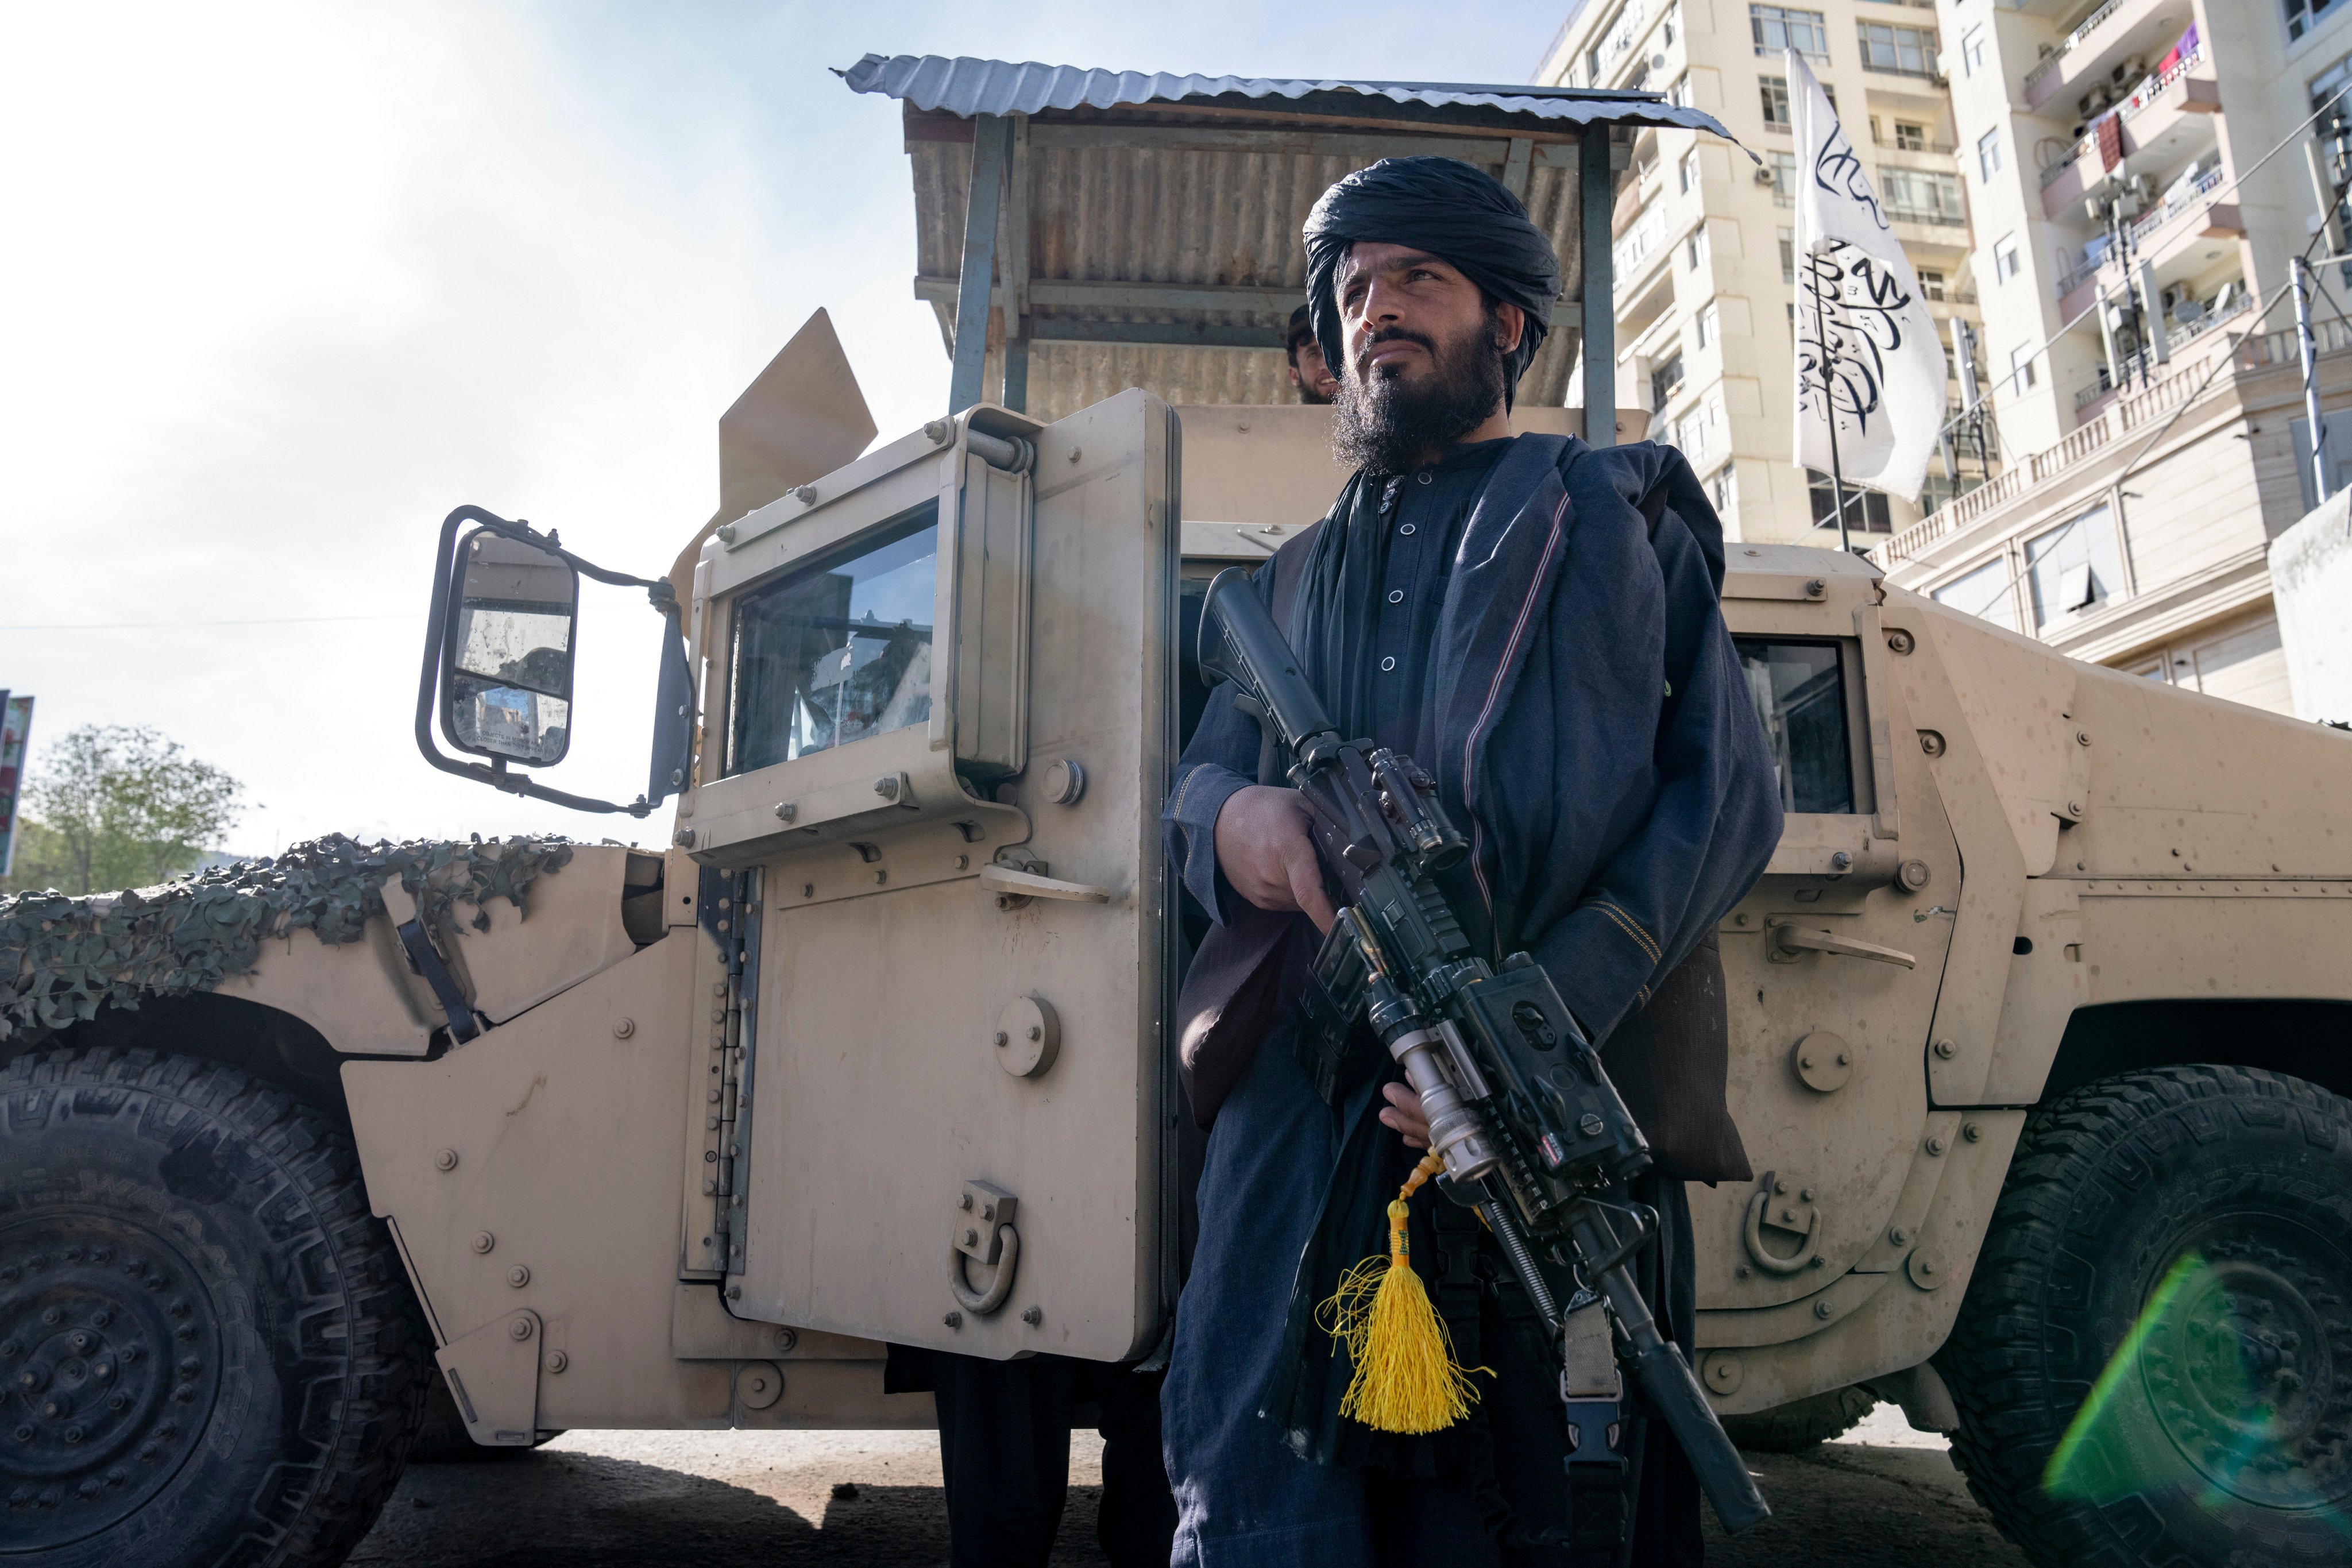 A Taliban fighter stands guard near the foreign ministry in Kabul on March 27 after a suicide bomb attack. Afghanistan’s neighbours want the Taliban to tackle terrorism, form an inclusive government and restore women’s rights. Photo: AP